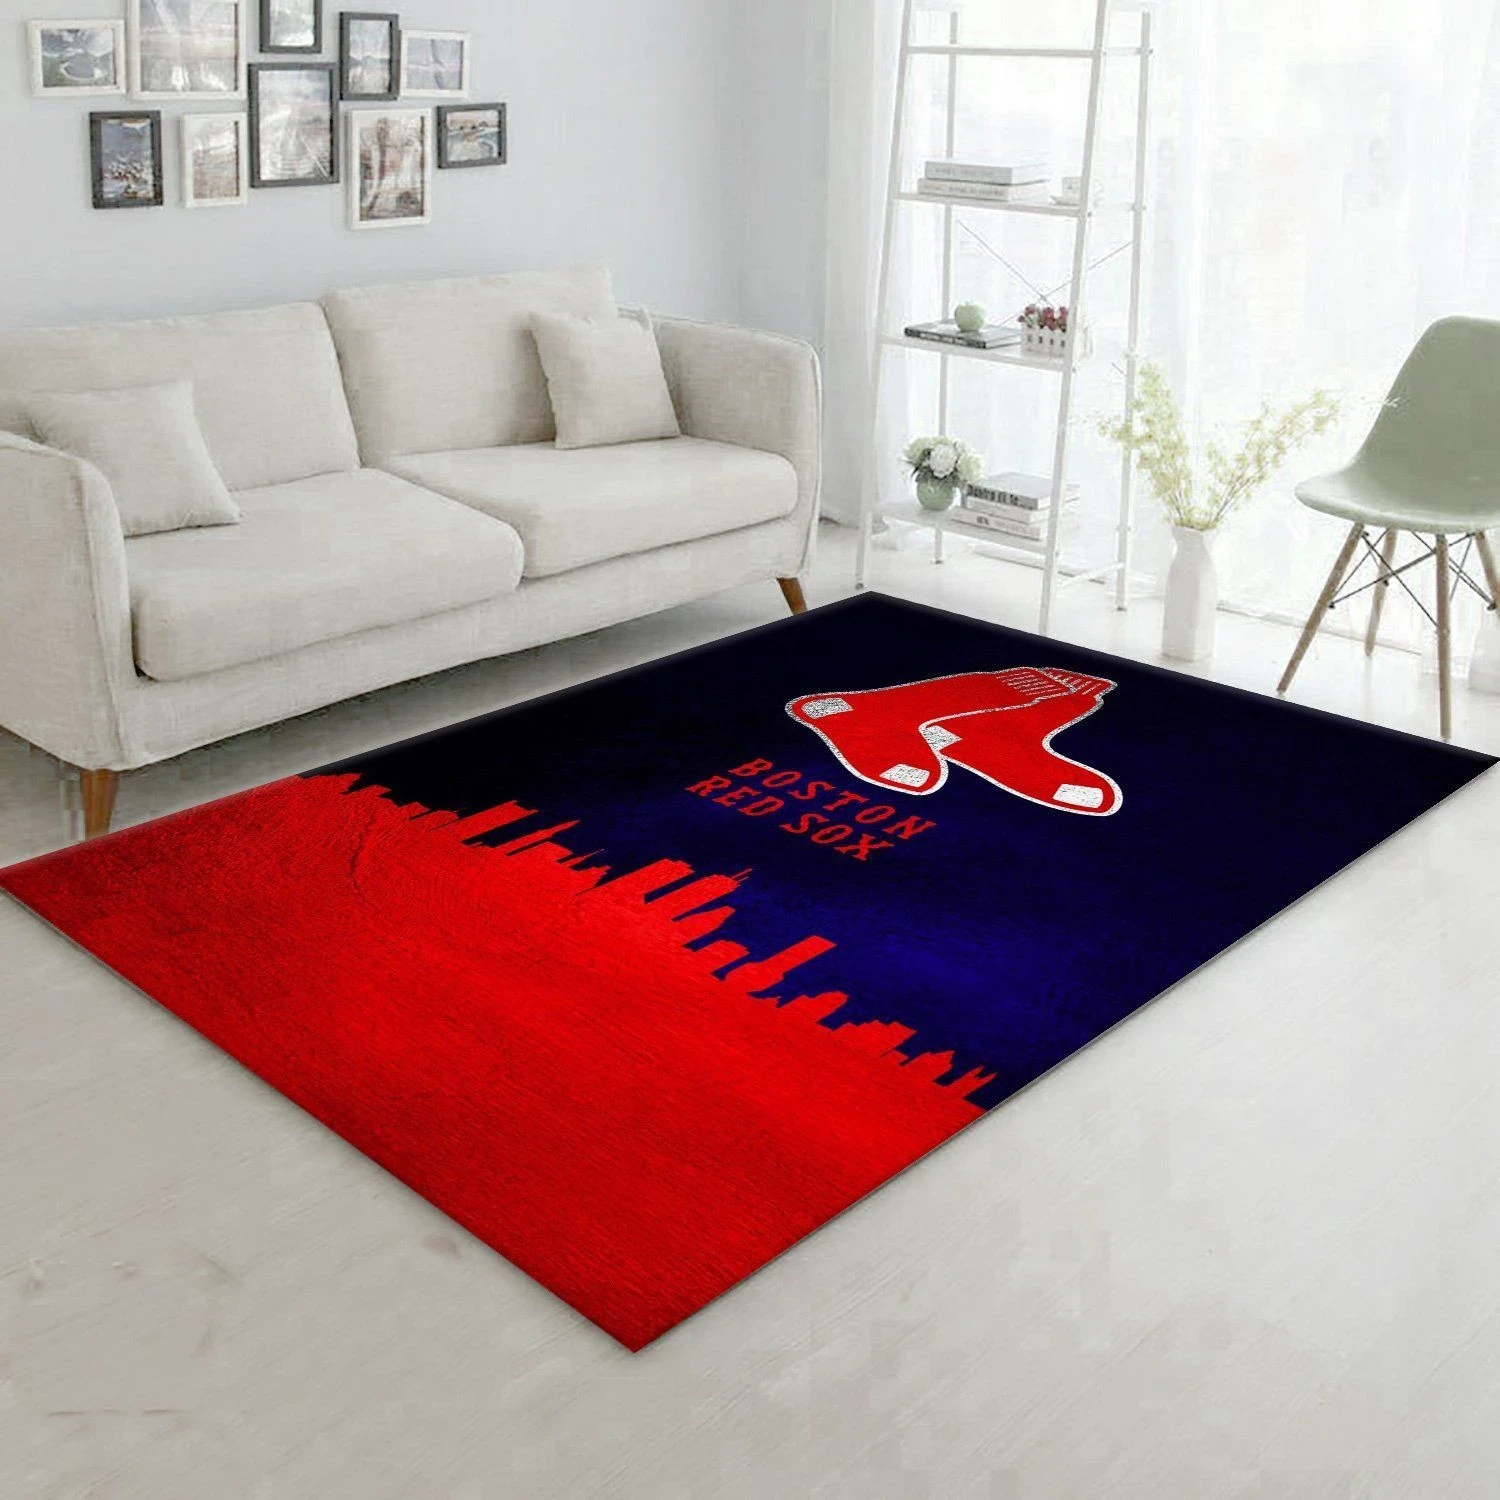 Boston Red Sox Skyline Area Rug For Christmas, Bedroom, Home US Decor - Indoor Outdoor Rugs 2